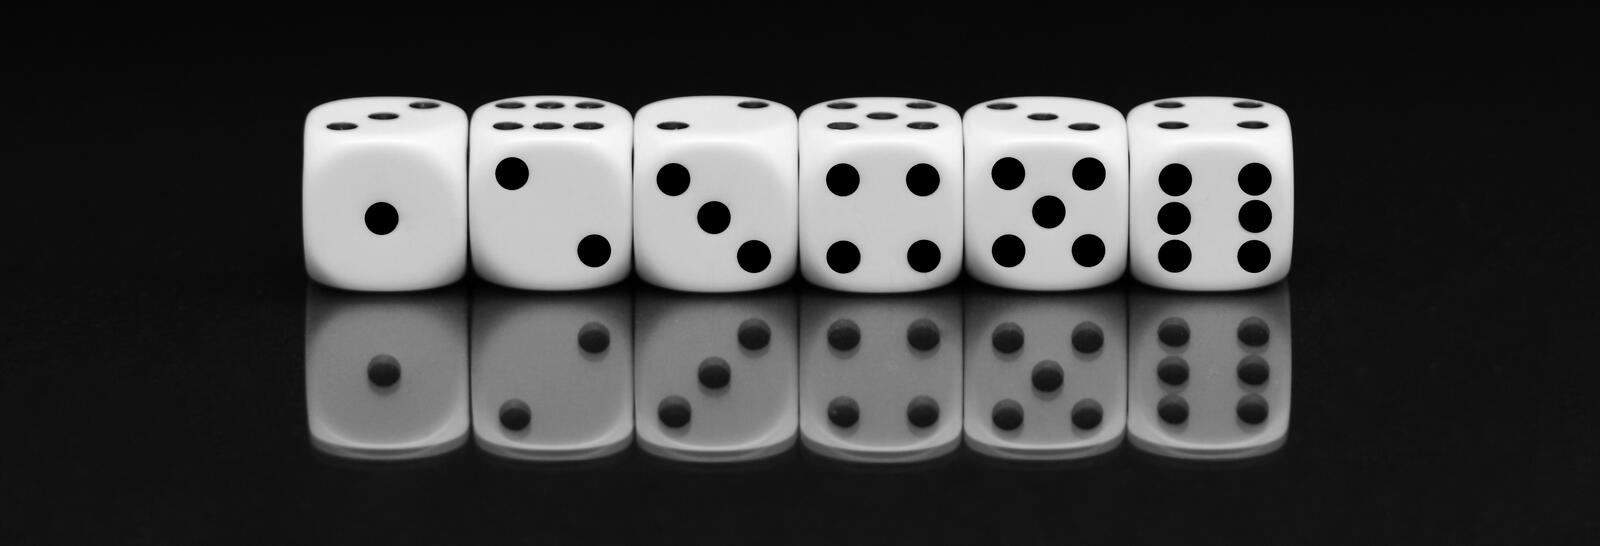 Free photo Dice on a black background